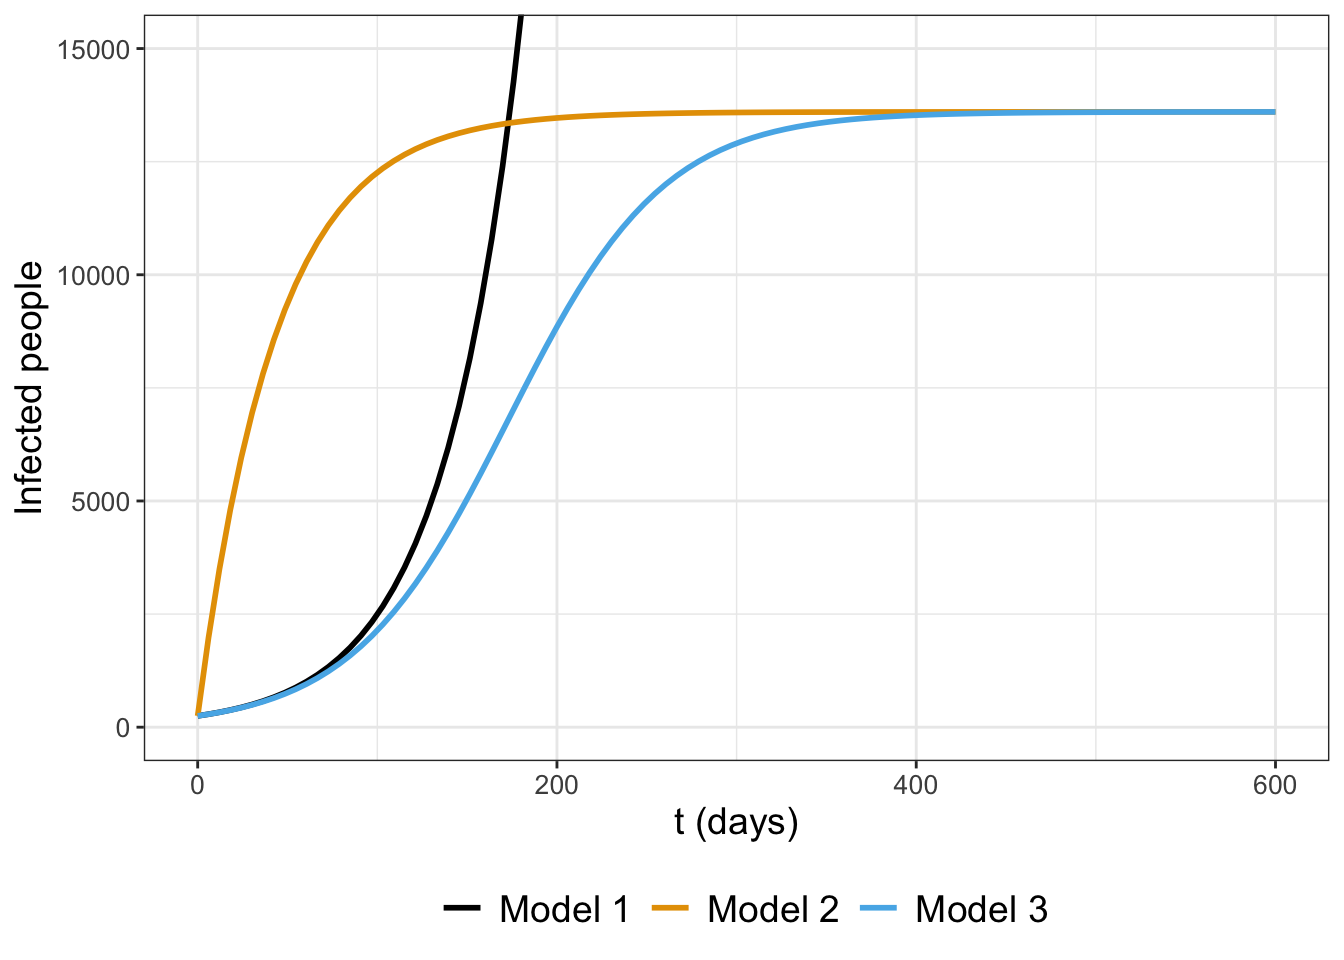 Three models (Exponential, Saturating, and Logistic; Equation \@ref(eq:all3-01)) compared.